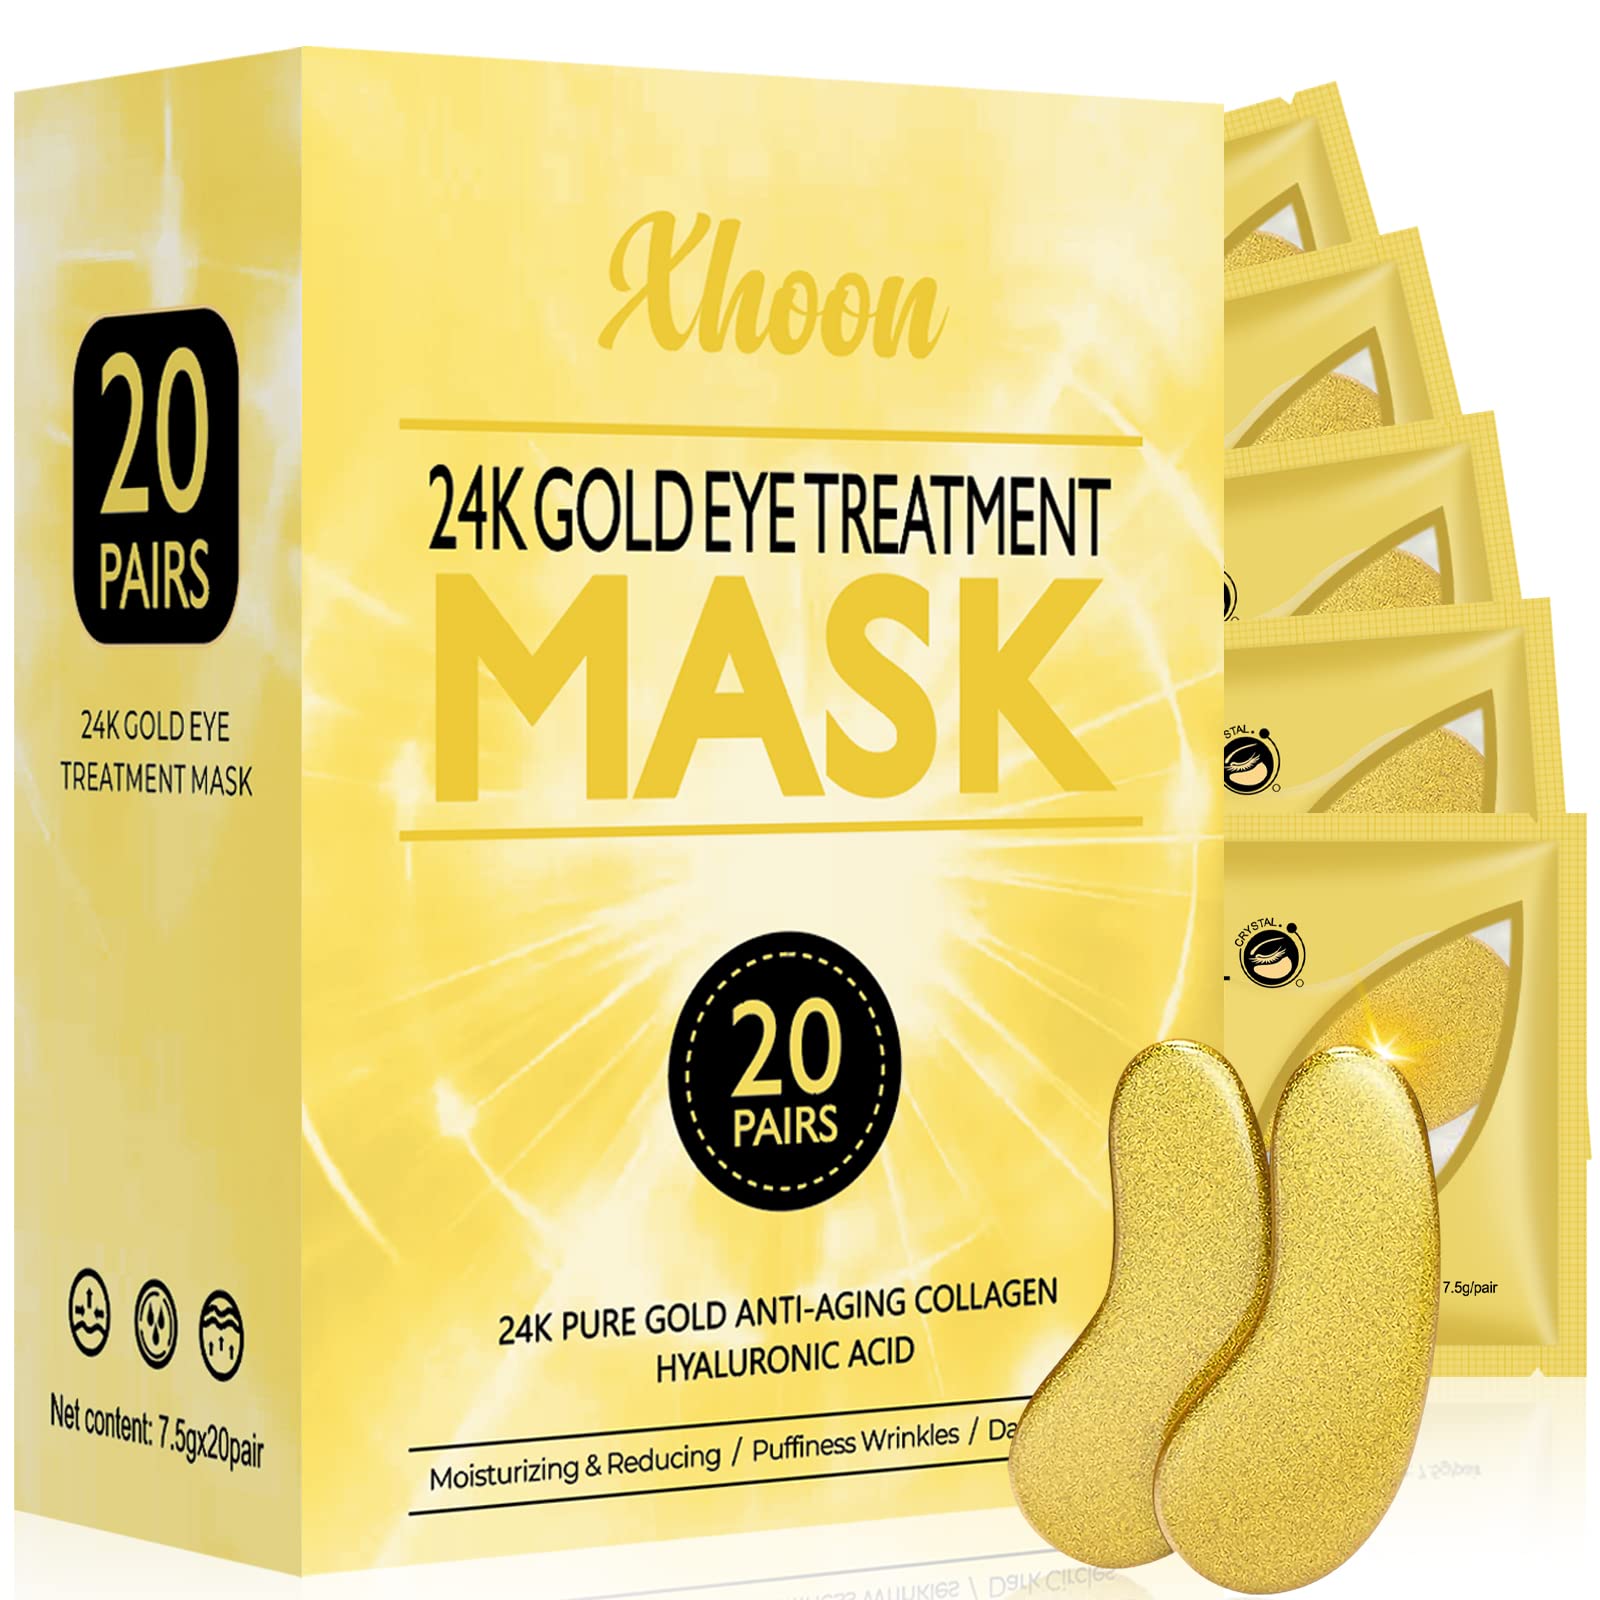 Xhoon 24K Gold Under Eye Patches - 20 Pairs Amino Acid & Collagen, Under Eye Mask for Face Care, Dark Circles and Puffiness, Beauty & Personal Care